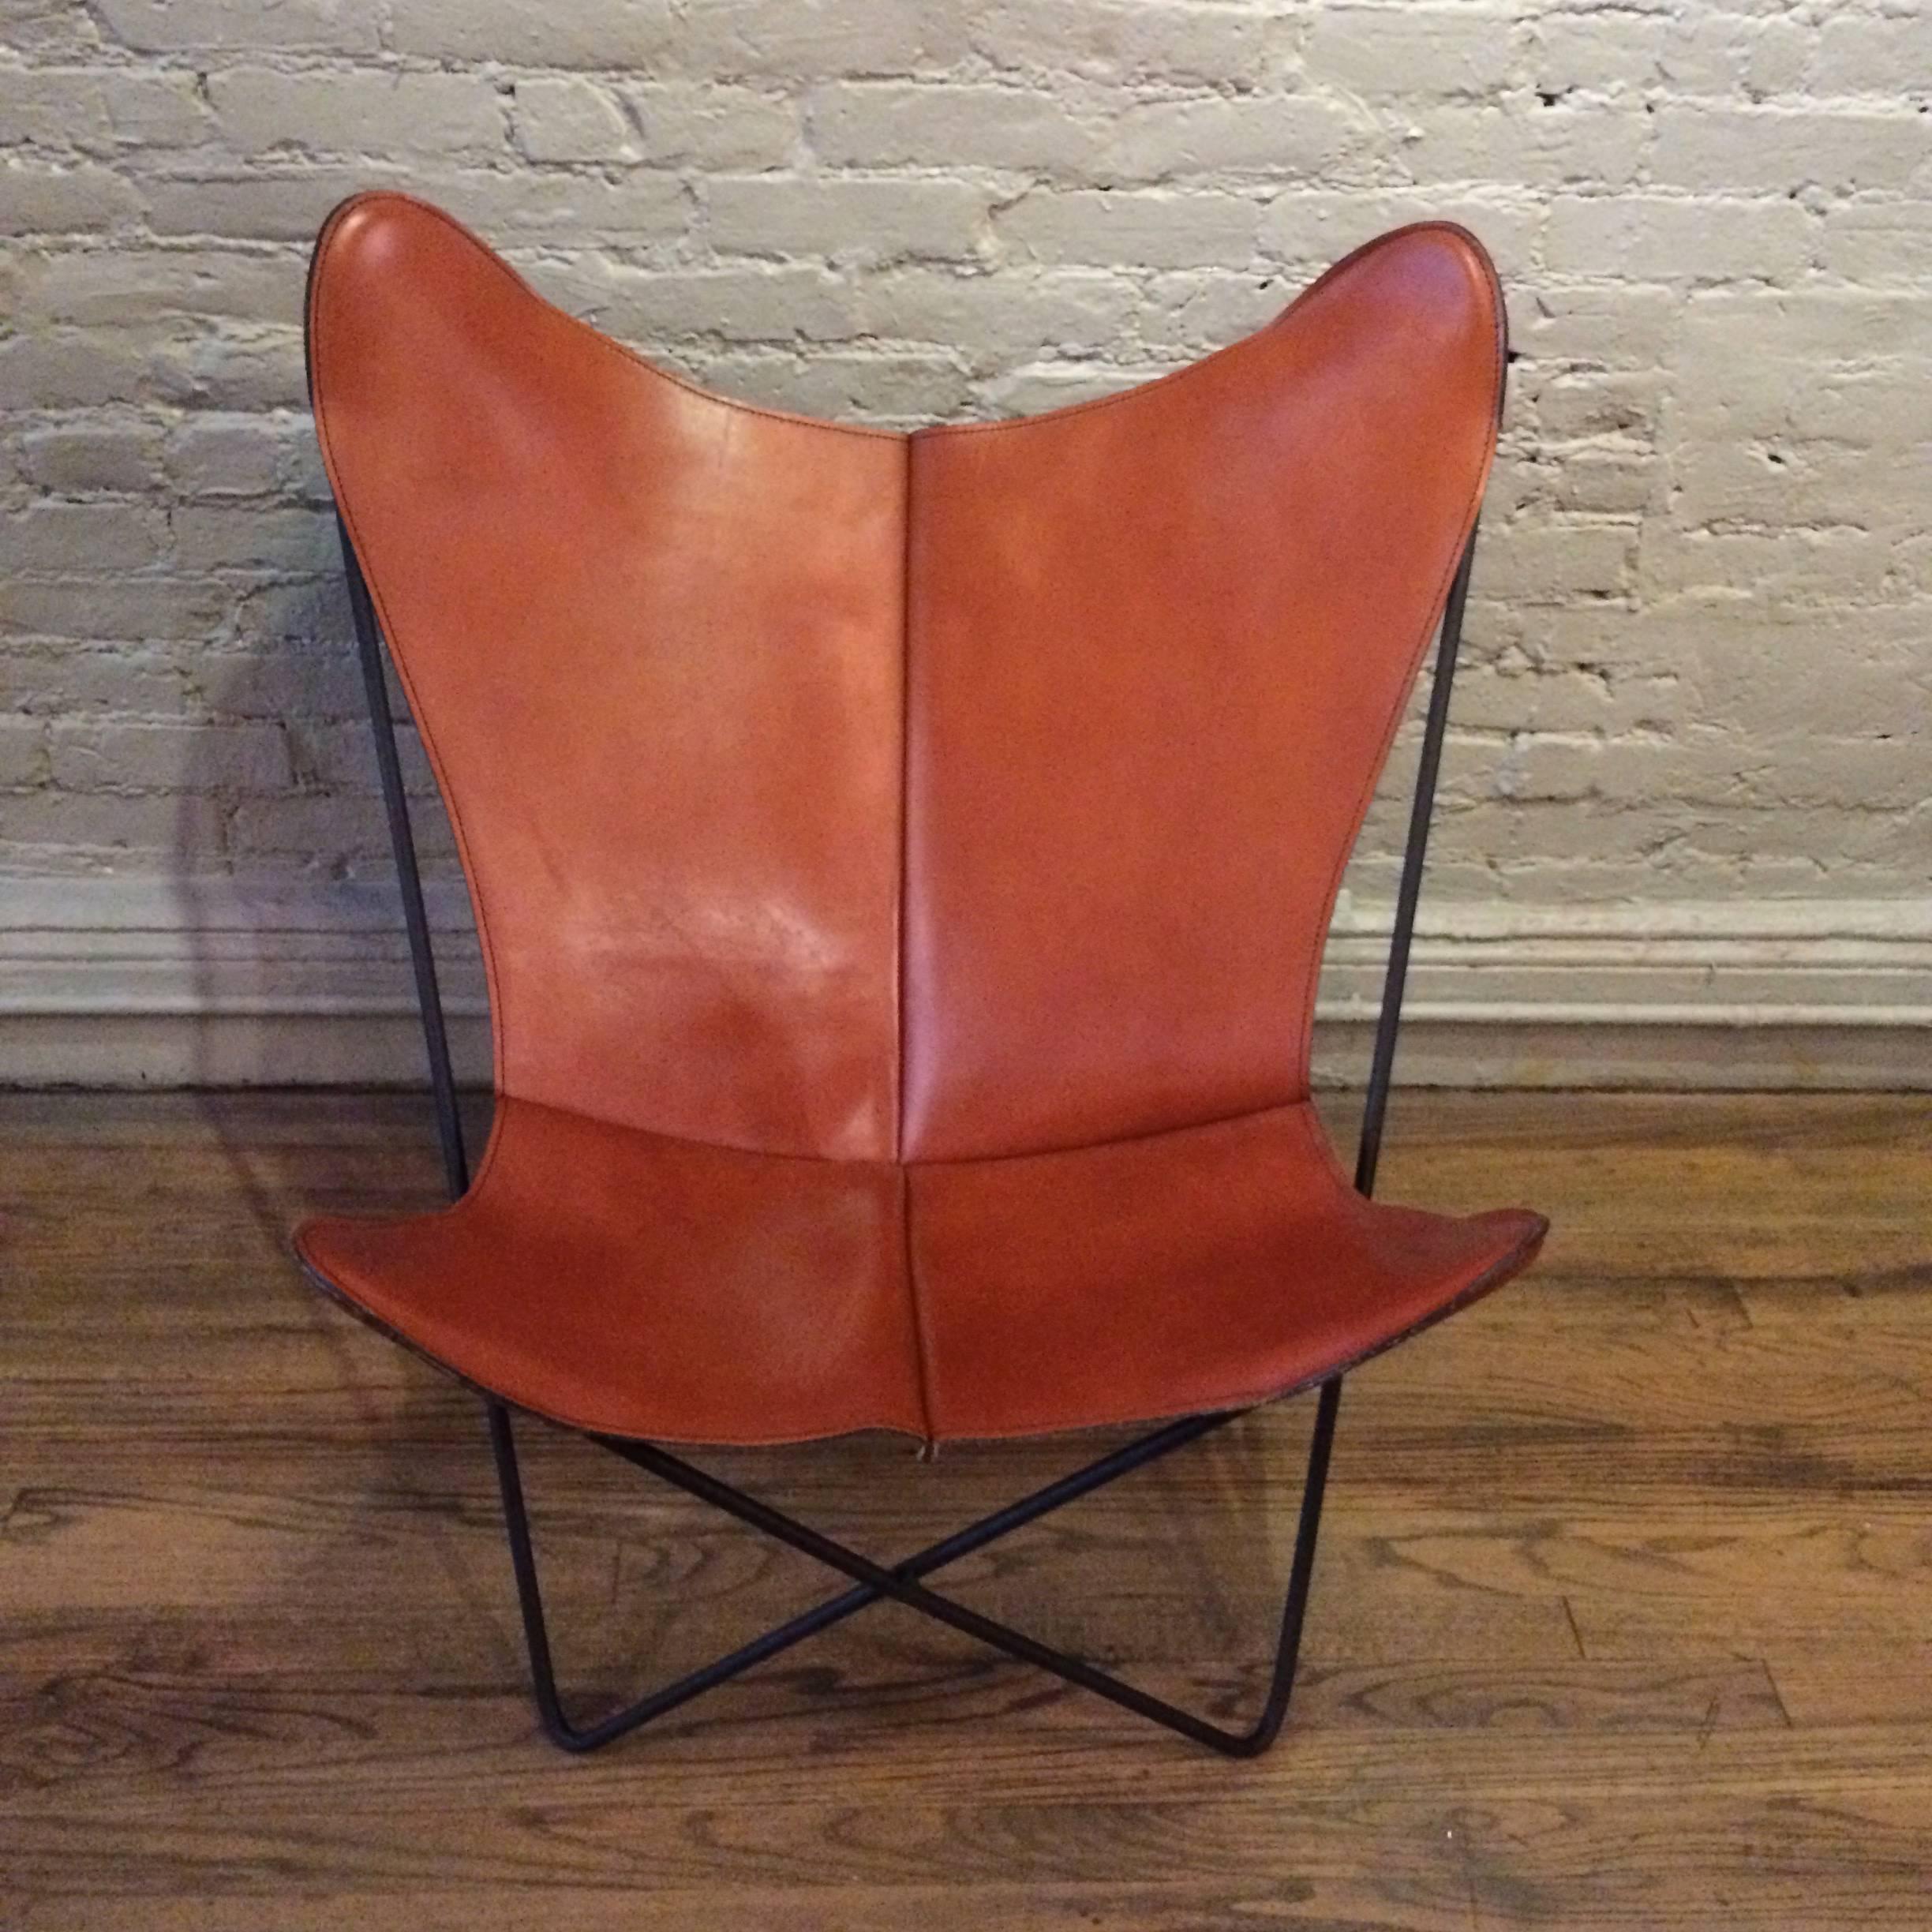 Mid-Century Modern, butterfly chair designed by Jorge Ferrari-Hardoy for Knoll with wrought iron base and cognac leather seat. The base is newly painted and the leather is in excellent original condition.